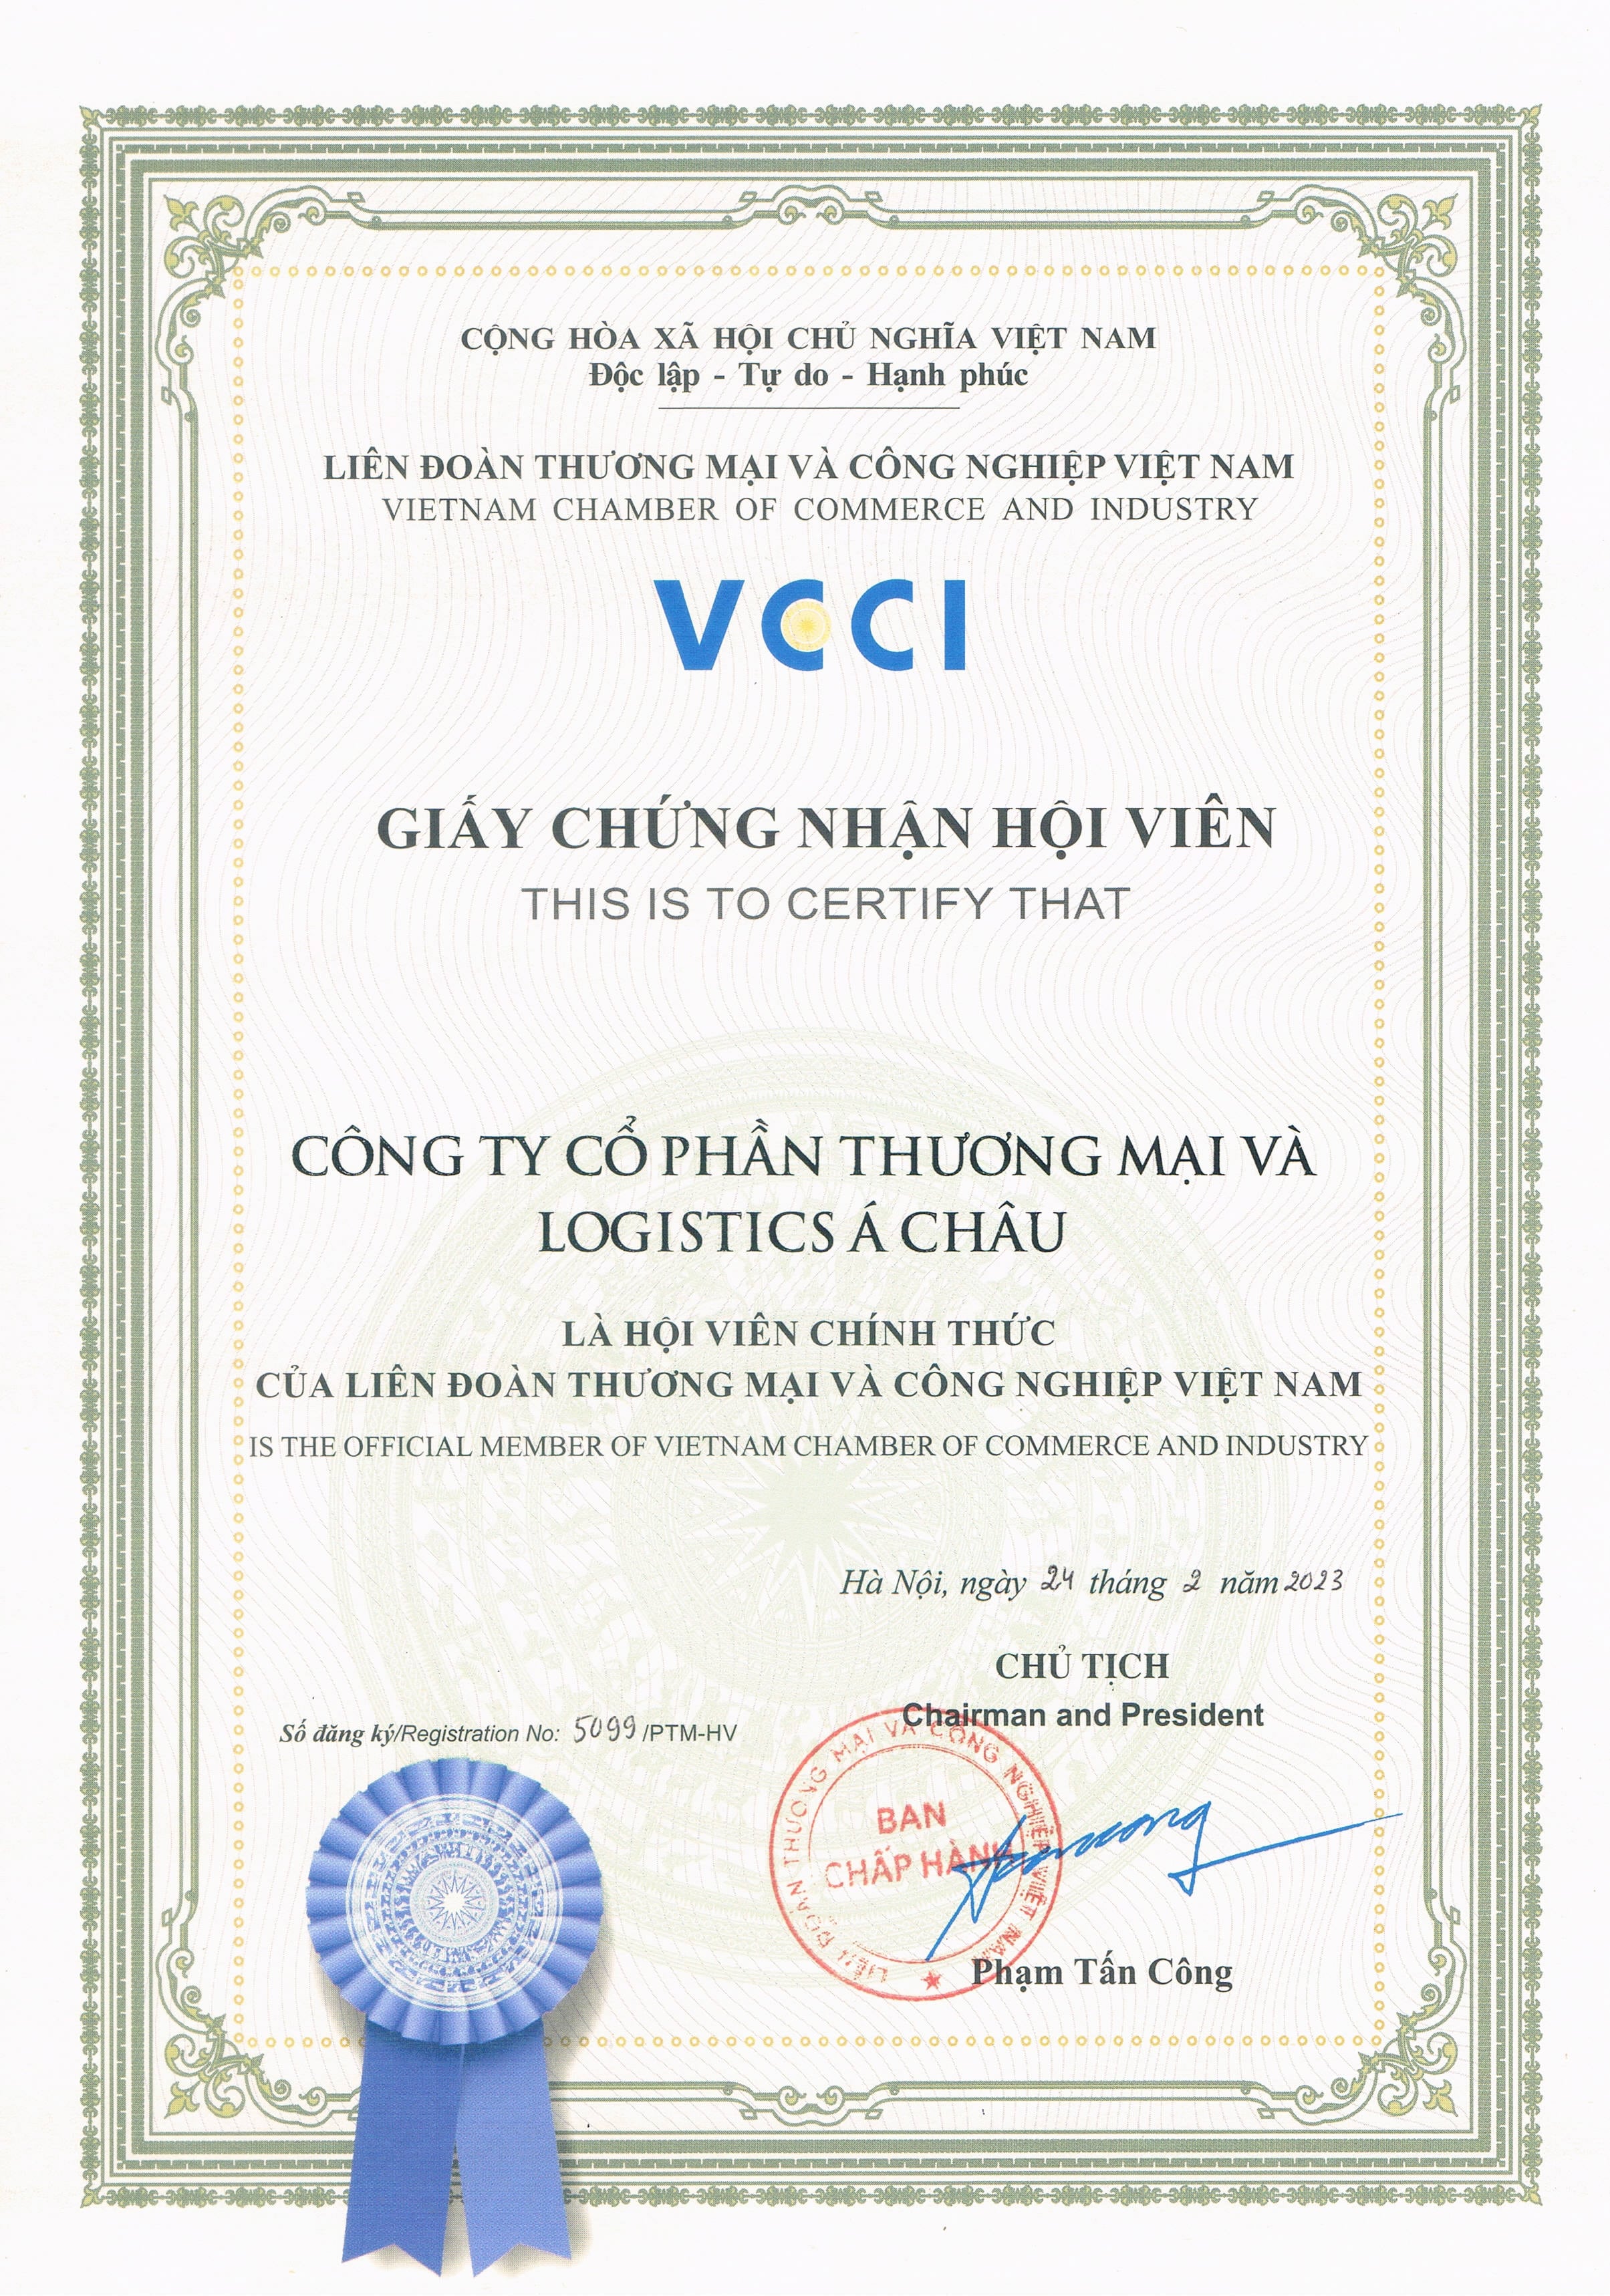 ASHICO LOGISTICS IS THE OFFICIAL MEMBER OF VIETNAM CHAMBER OF COMMERCE AND INDUSTRY